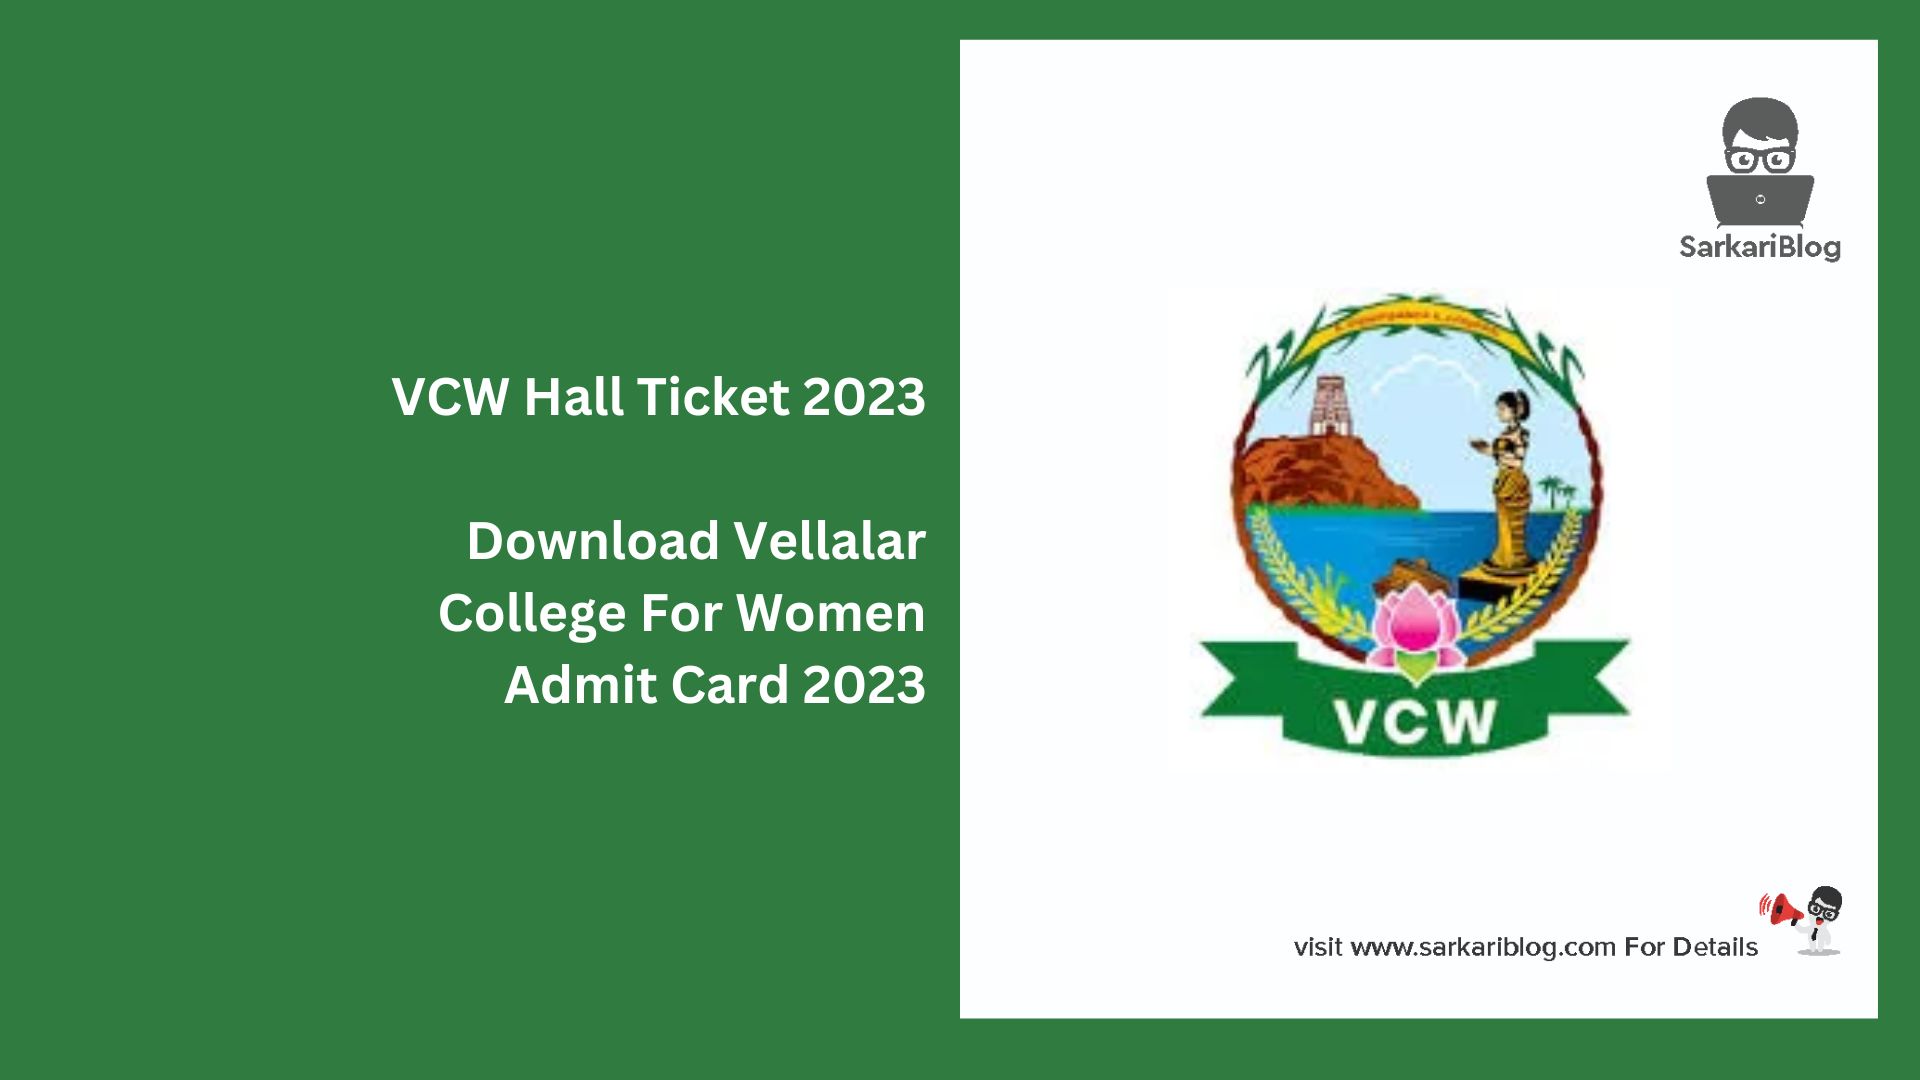 VCW Hall Ticket 2023